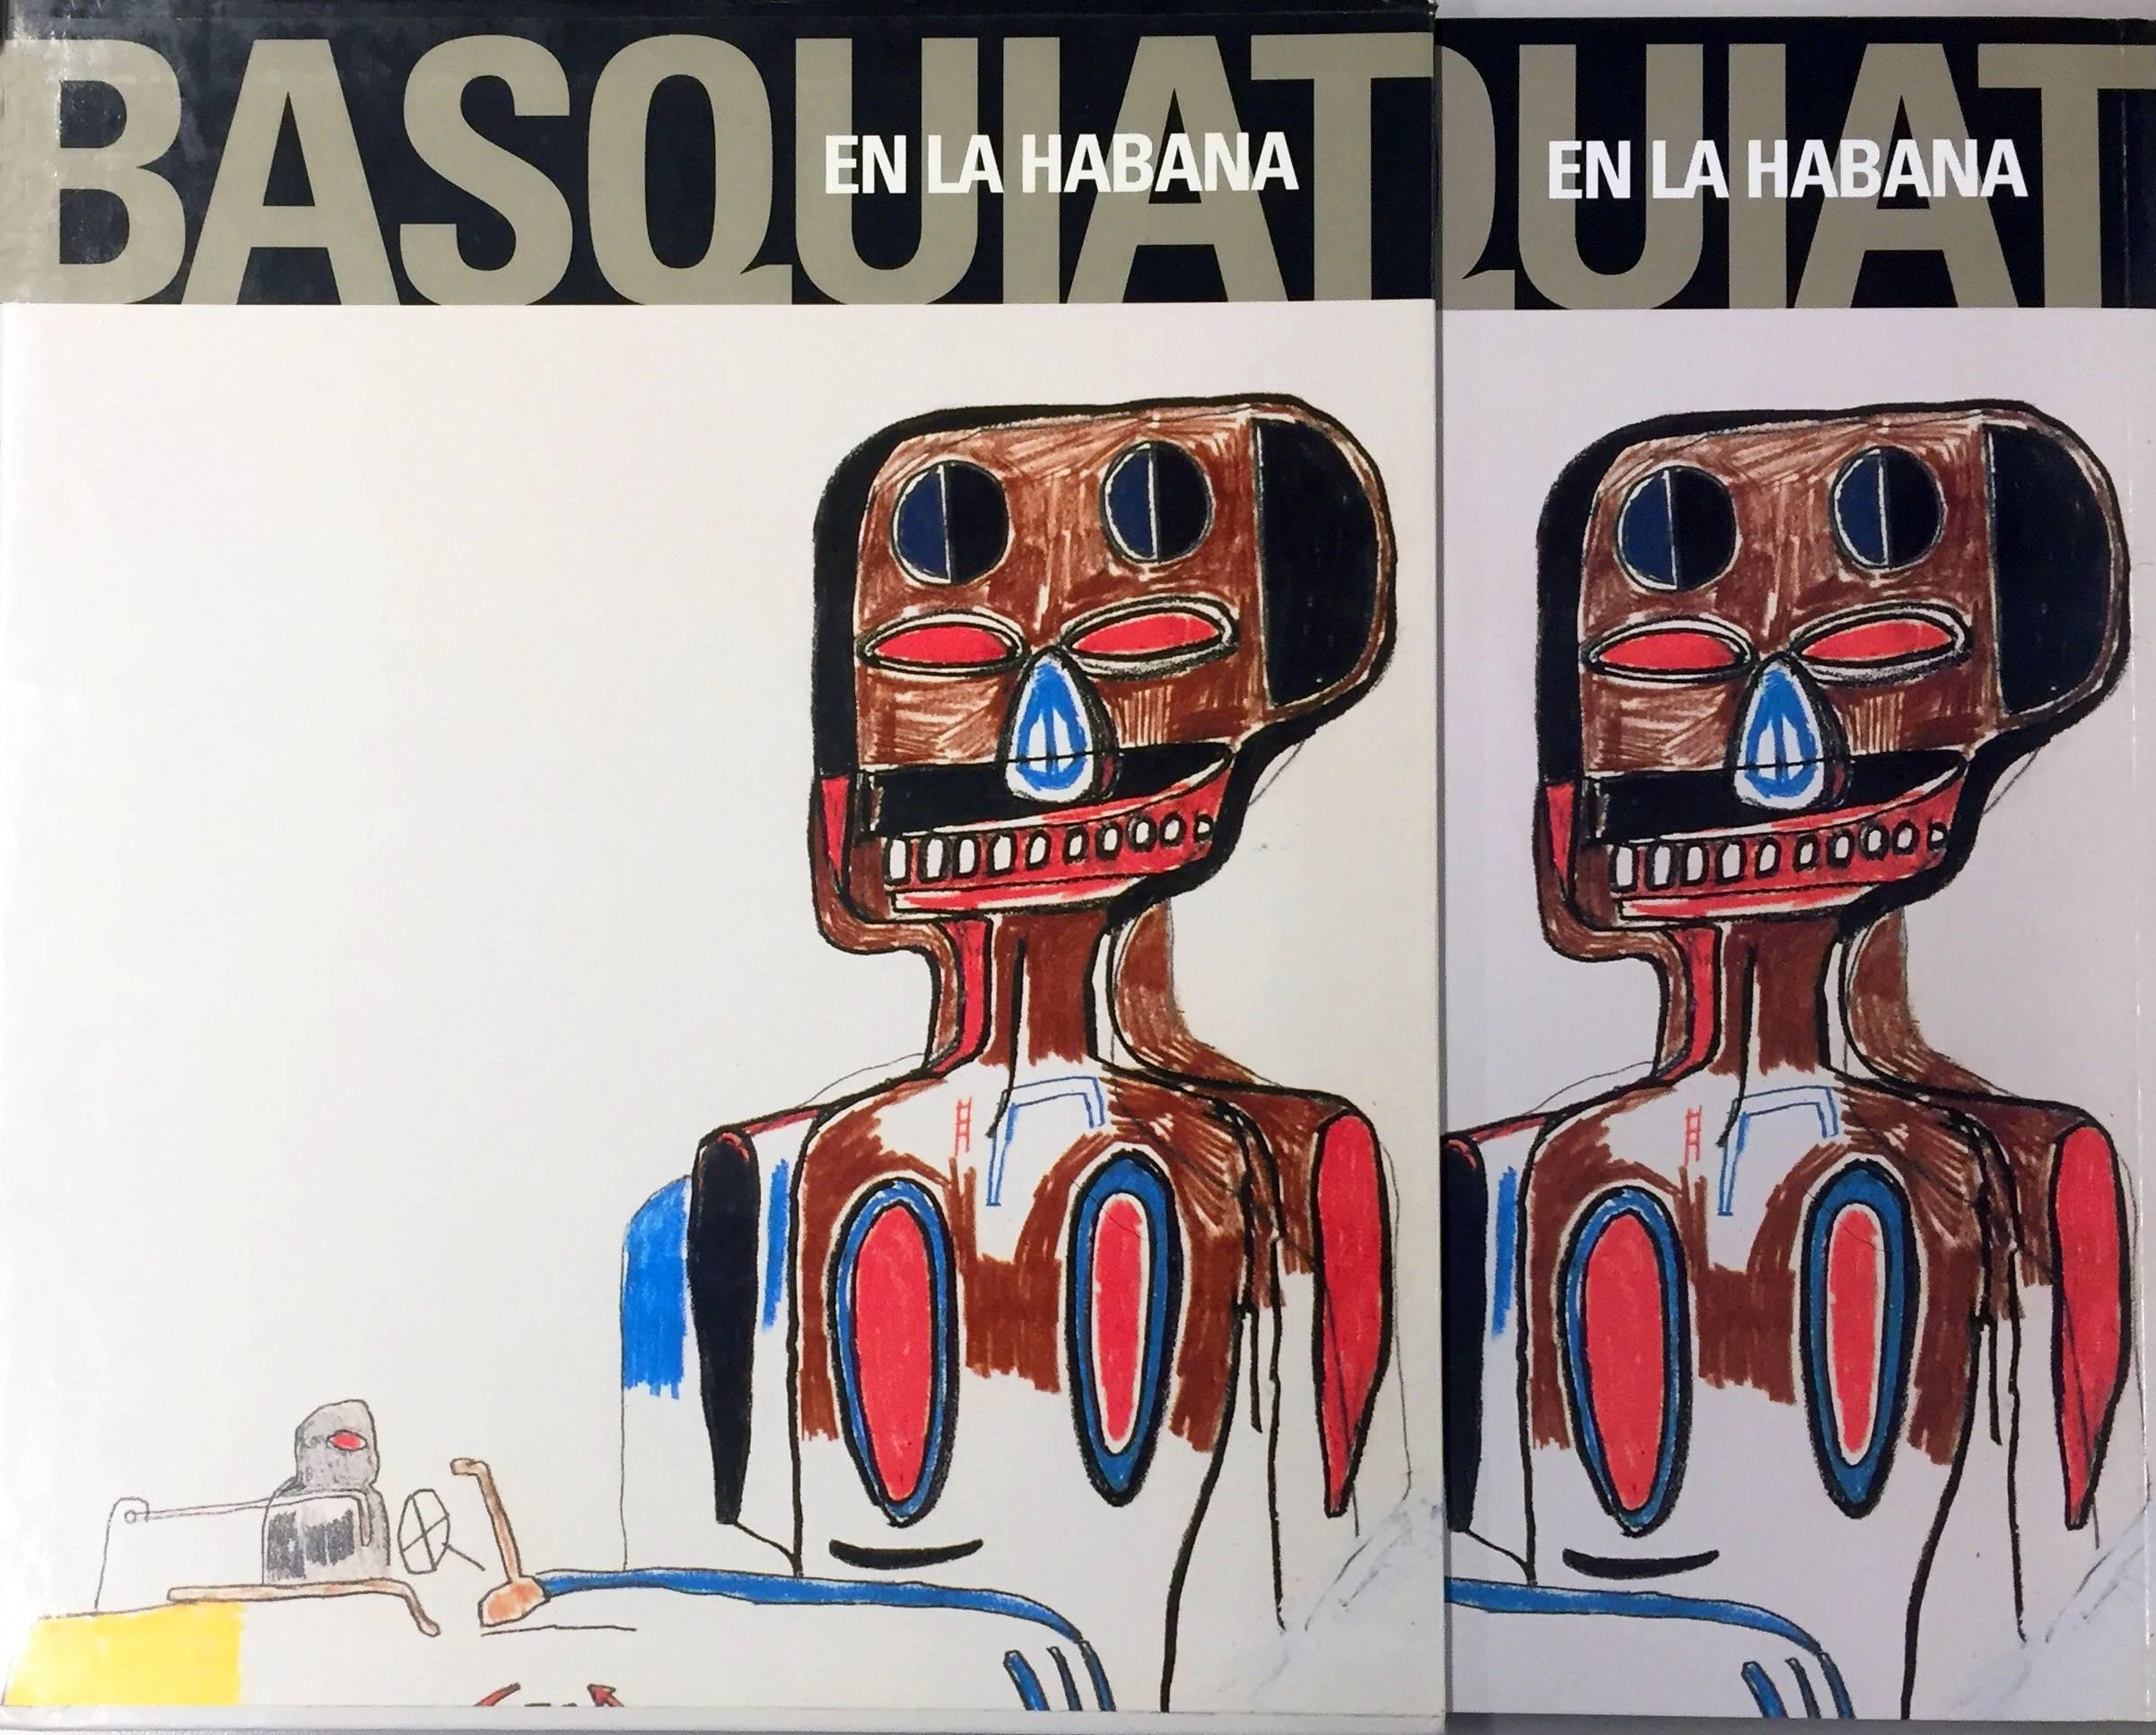 Basquiat En La Habana, Enrico Navarra Catalog; published 2000 for the exhibition, Basquiat in Havana: Ron Museum Havana Club Foundation and Haydeé Gallery Santamaría of the House of the Americas, November 2000-January 2001. 

Approximately 100 color